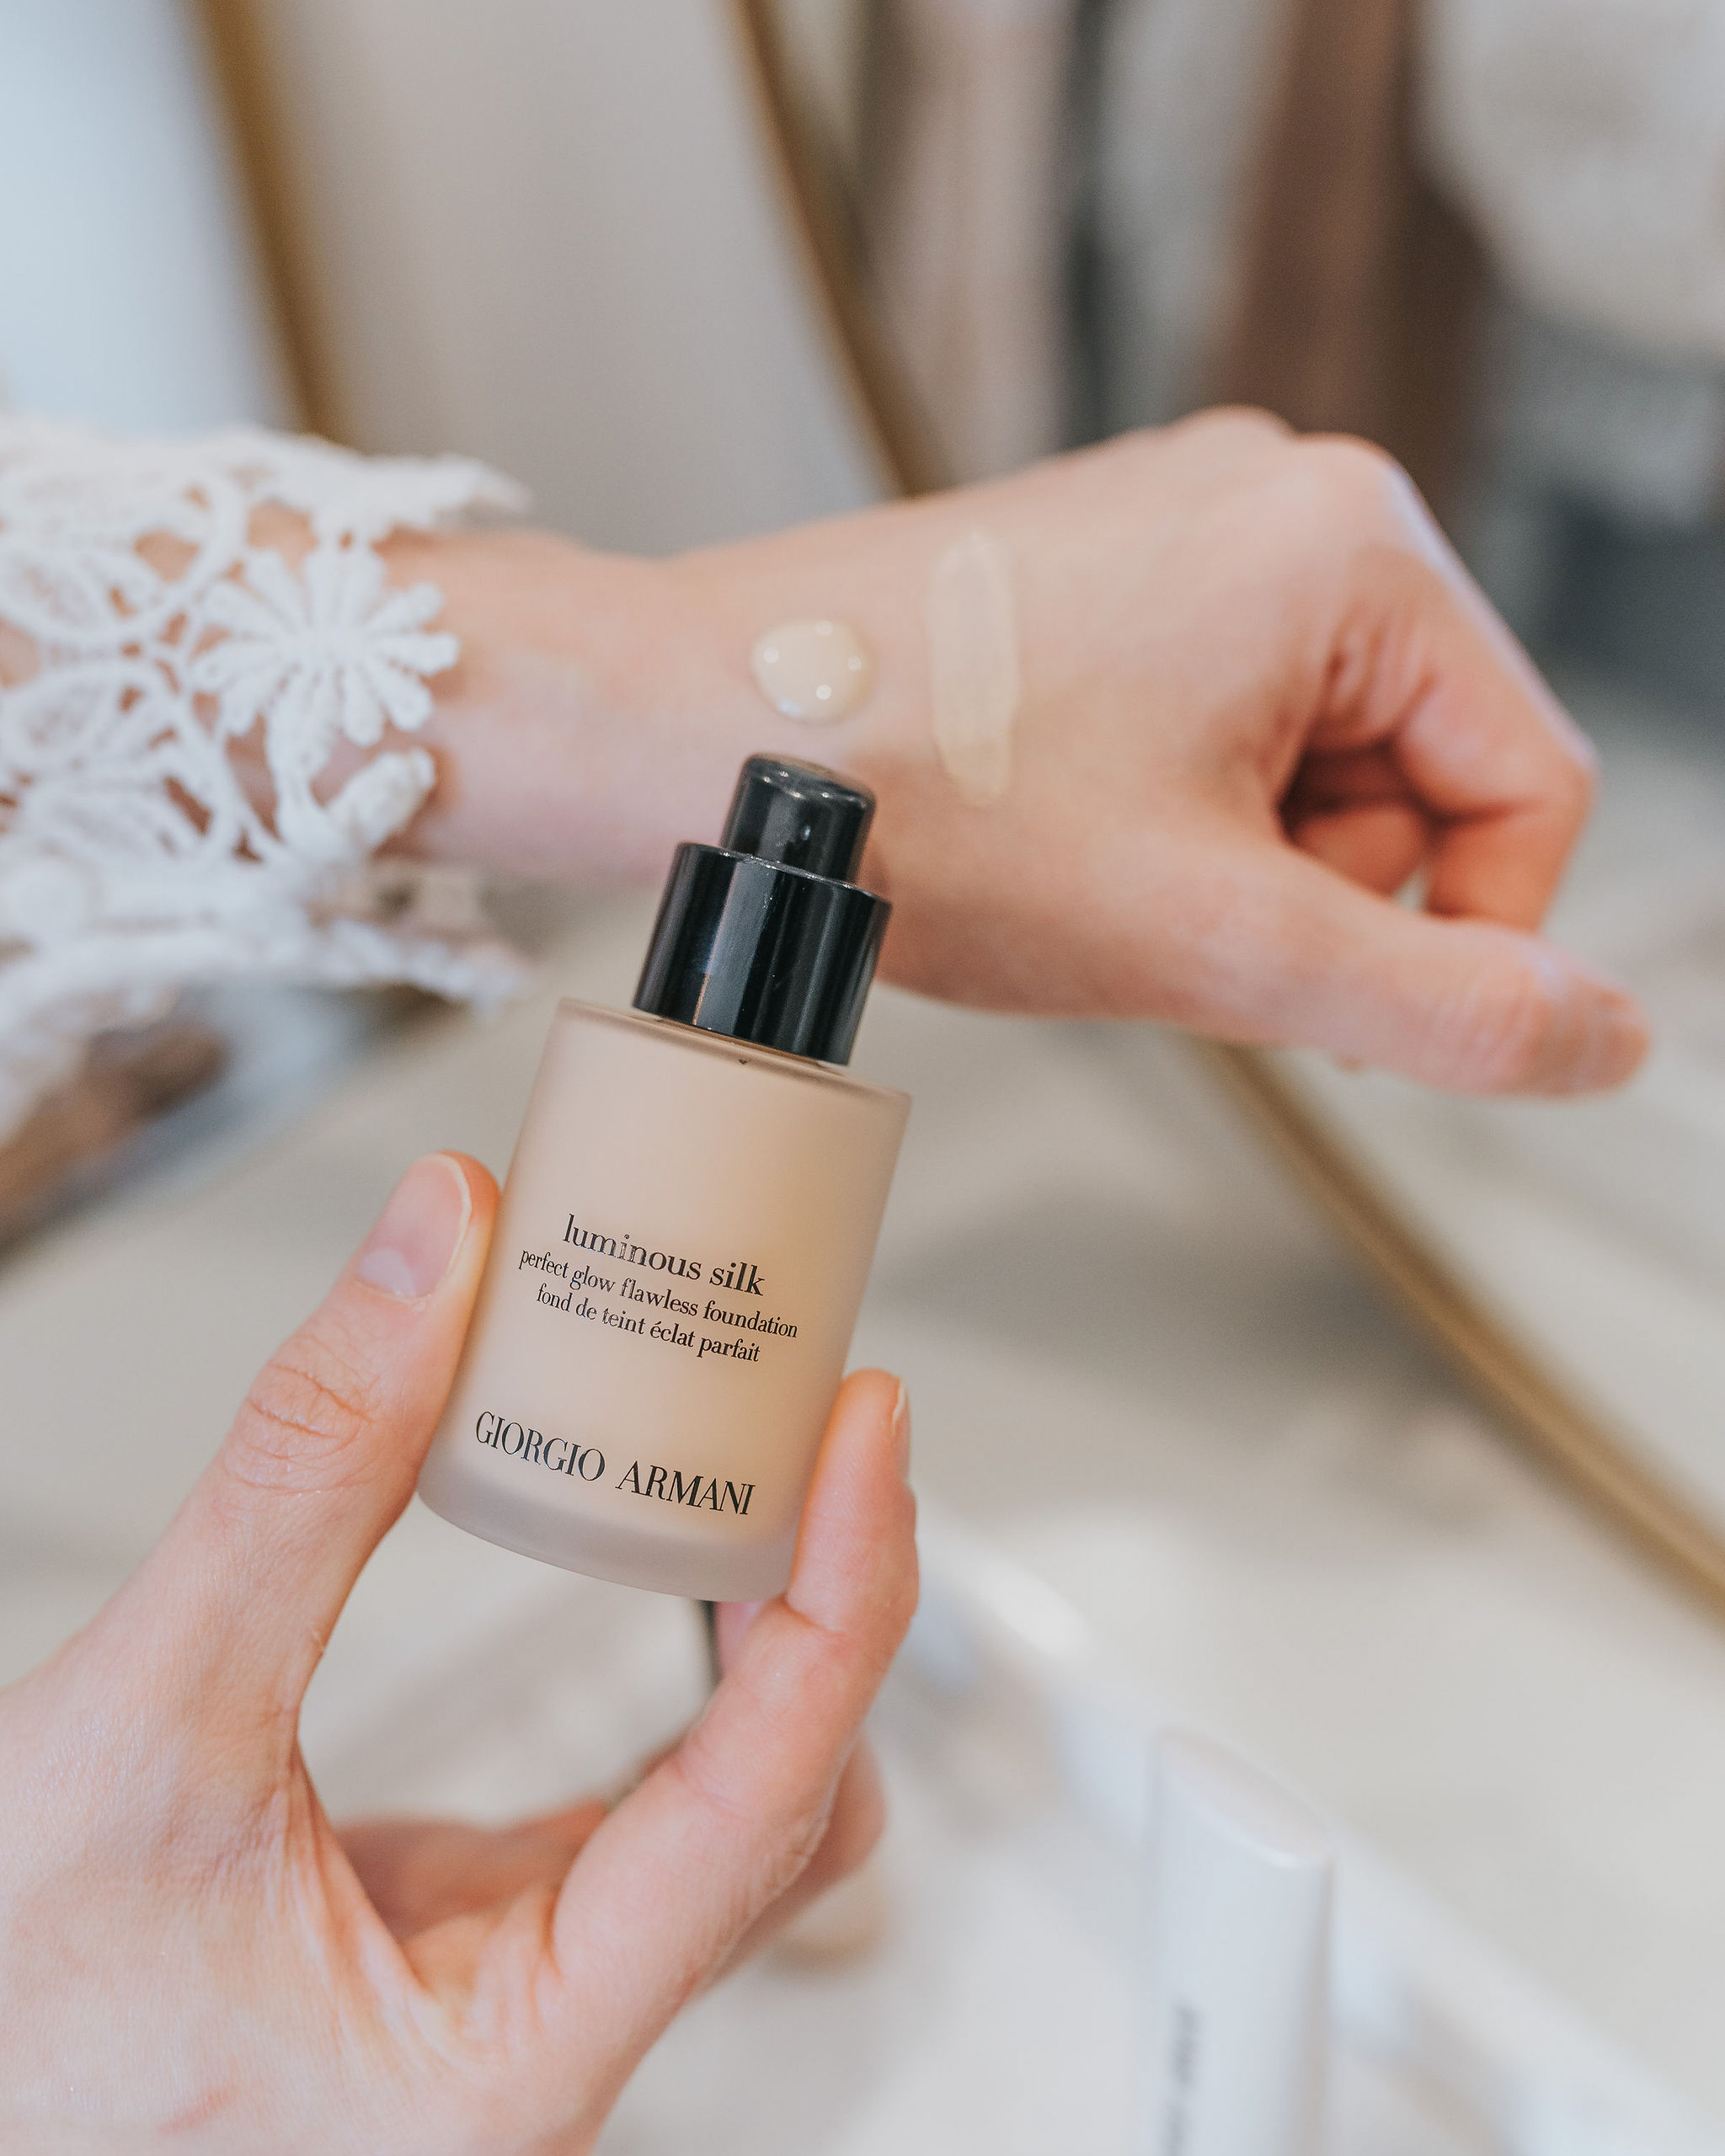 Review With Pictures: Armani Beauty Luminous Silk Foundation